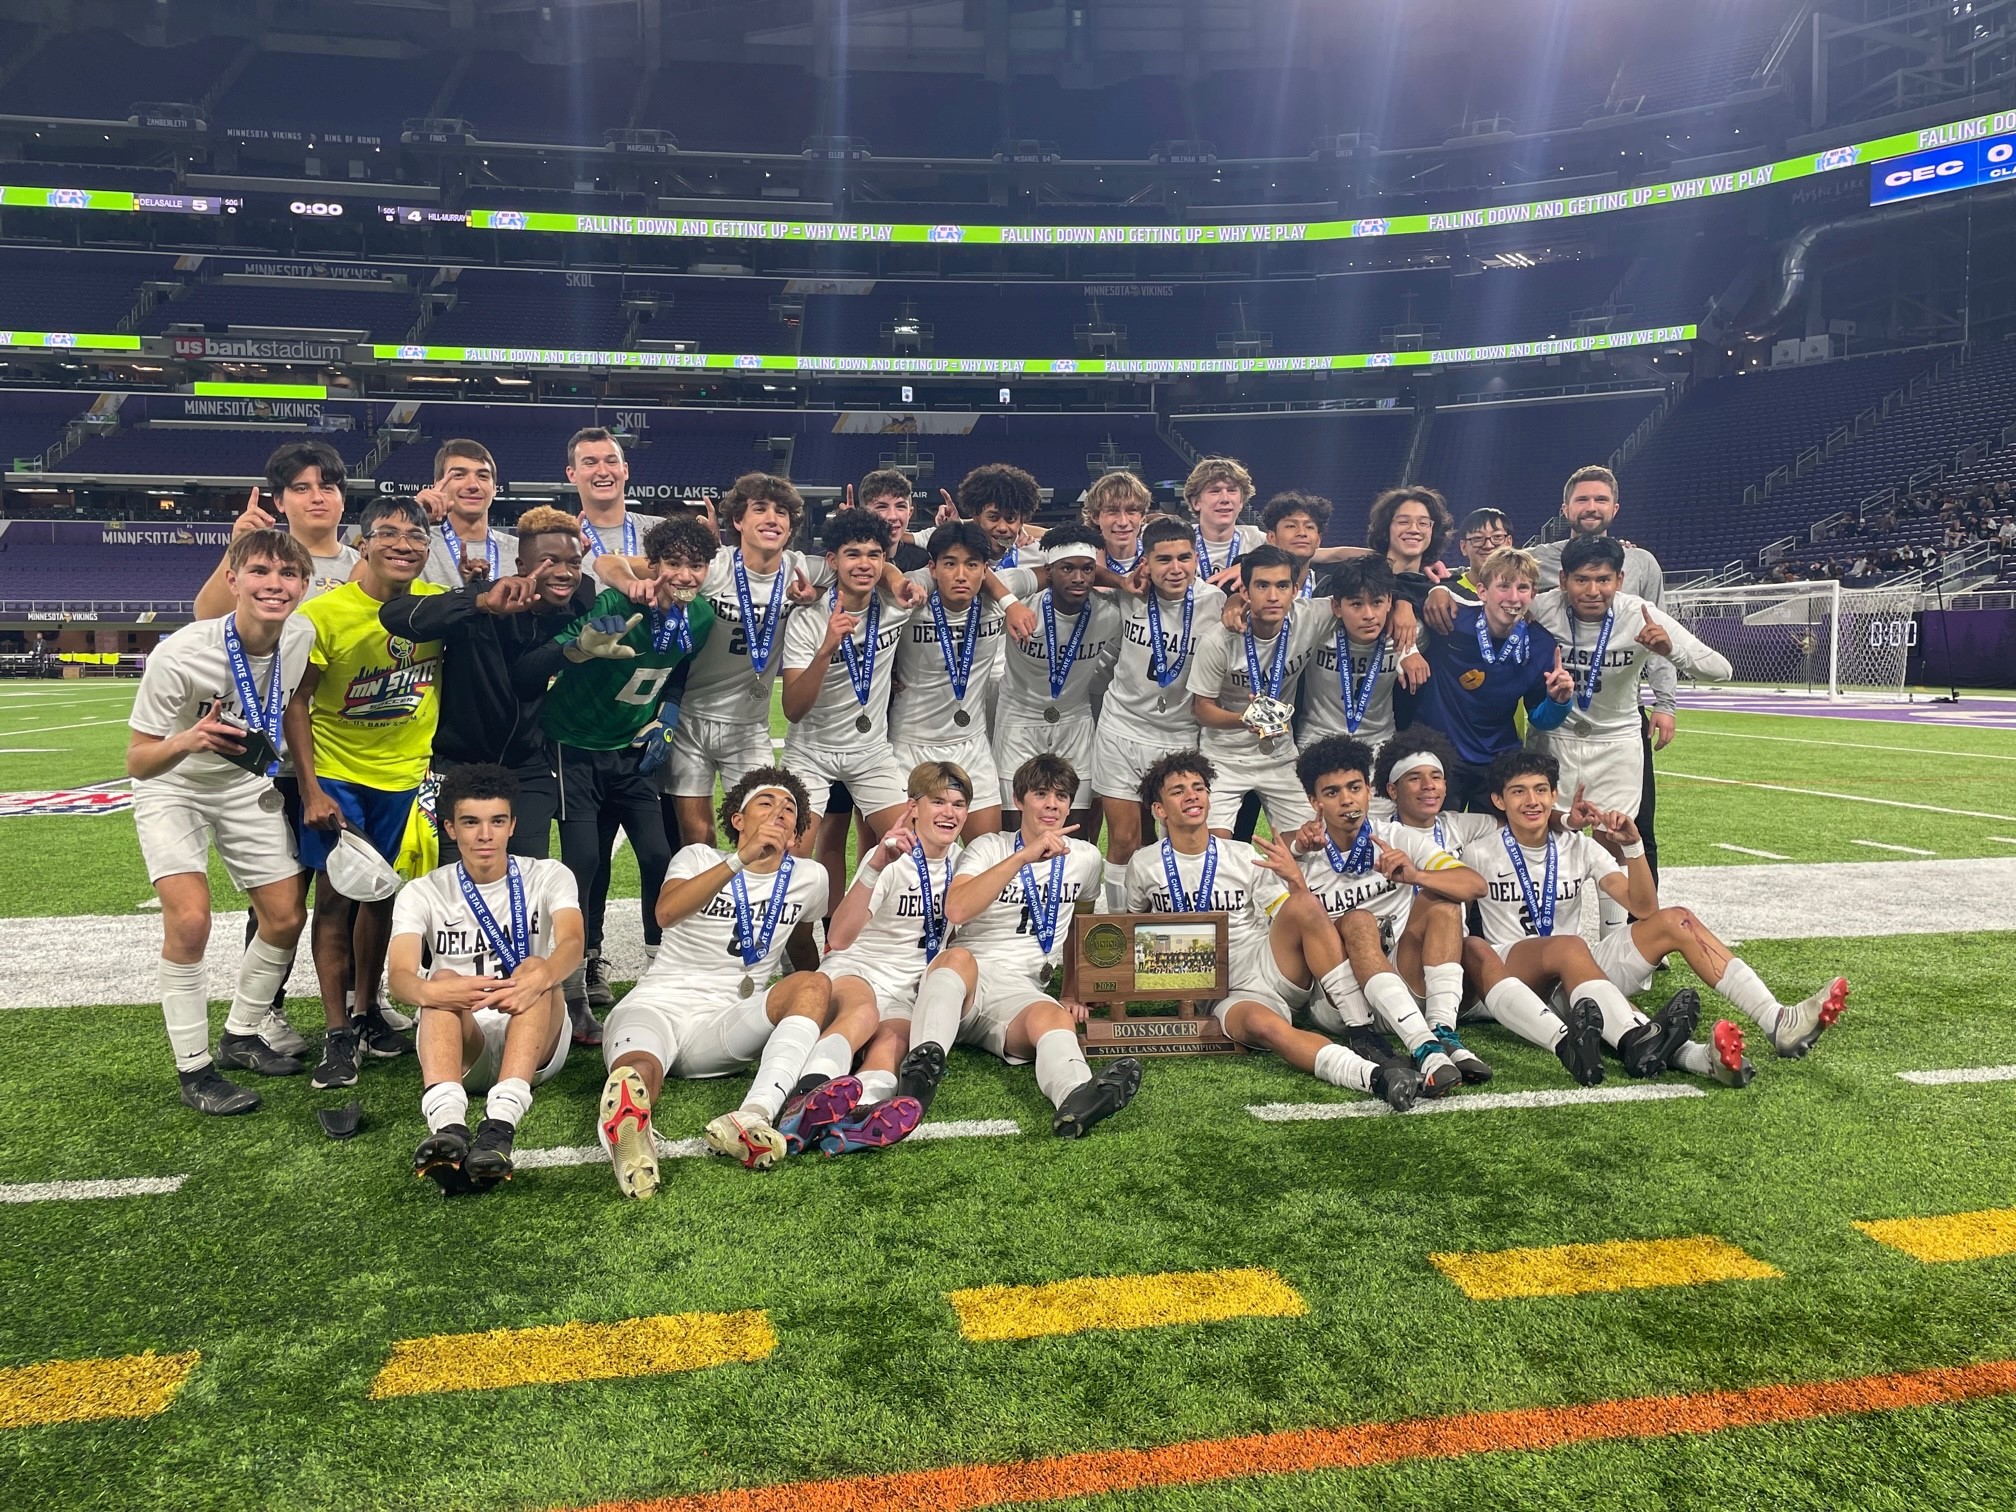 DeLaSalle wins the Class AA Boys Soccer state championship with a shootout victory over Hill-Murray